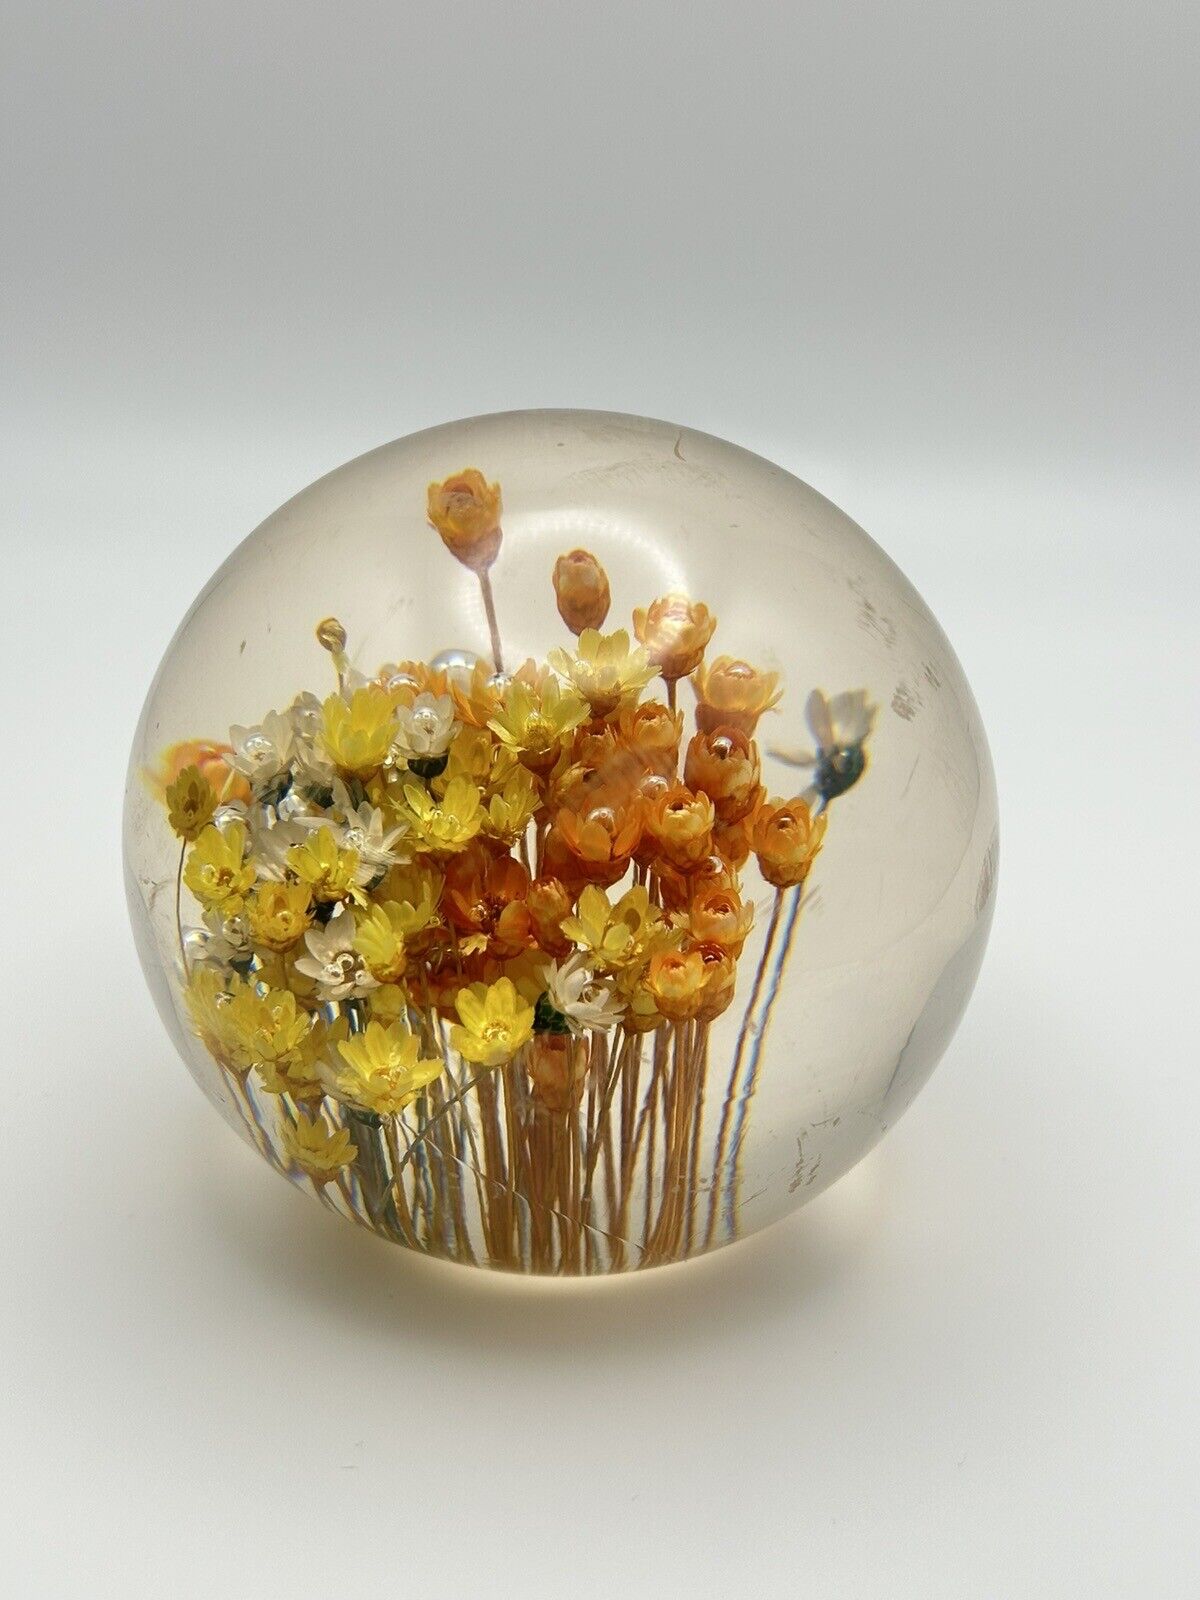 VTg 1960s MCM Lucite Acrylic Art Orb Ball Dry Flowers Paperweight